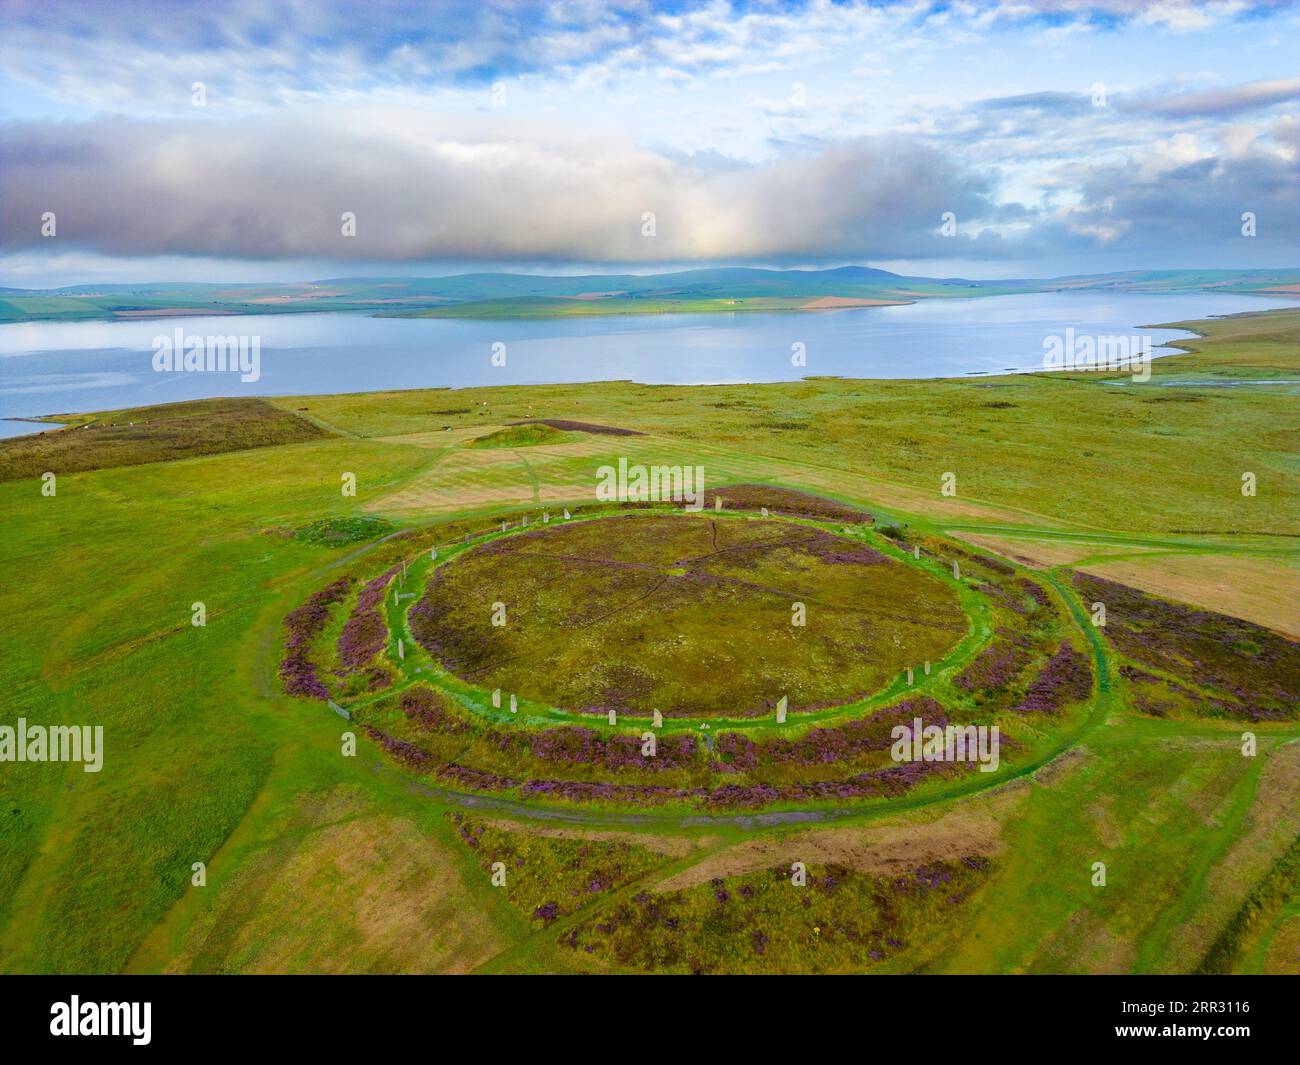 Aerial view of Ring of Brodgar neolithic henge and stone circle at West mainland, Orkney Islands, Scotland, UK. Stock Photo